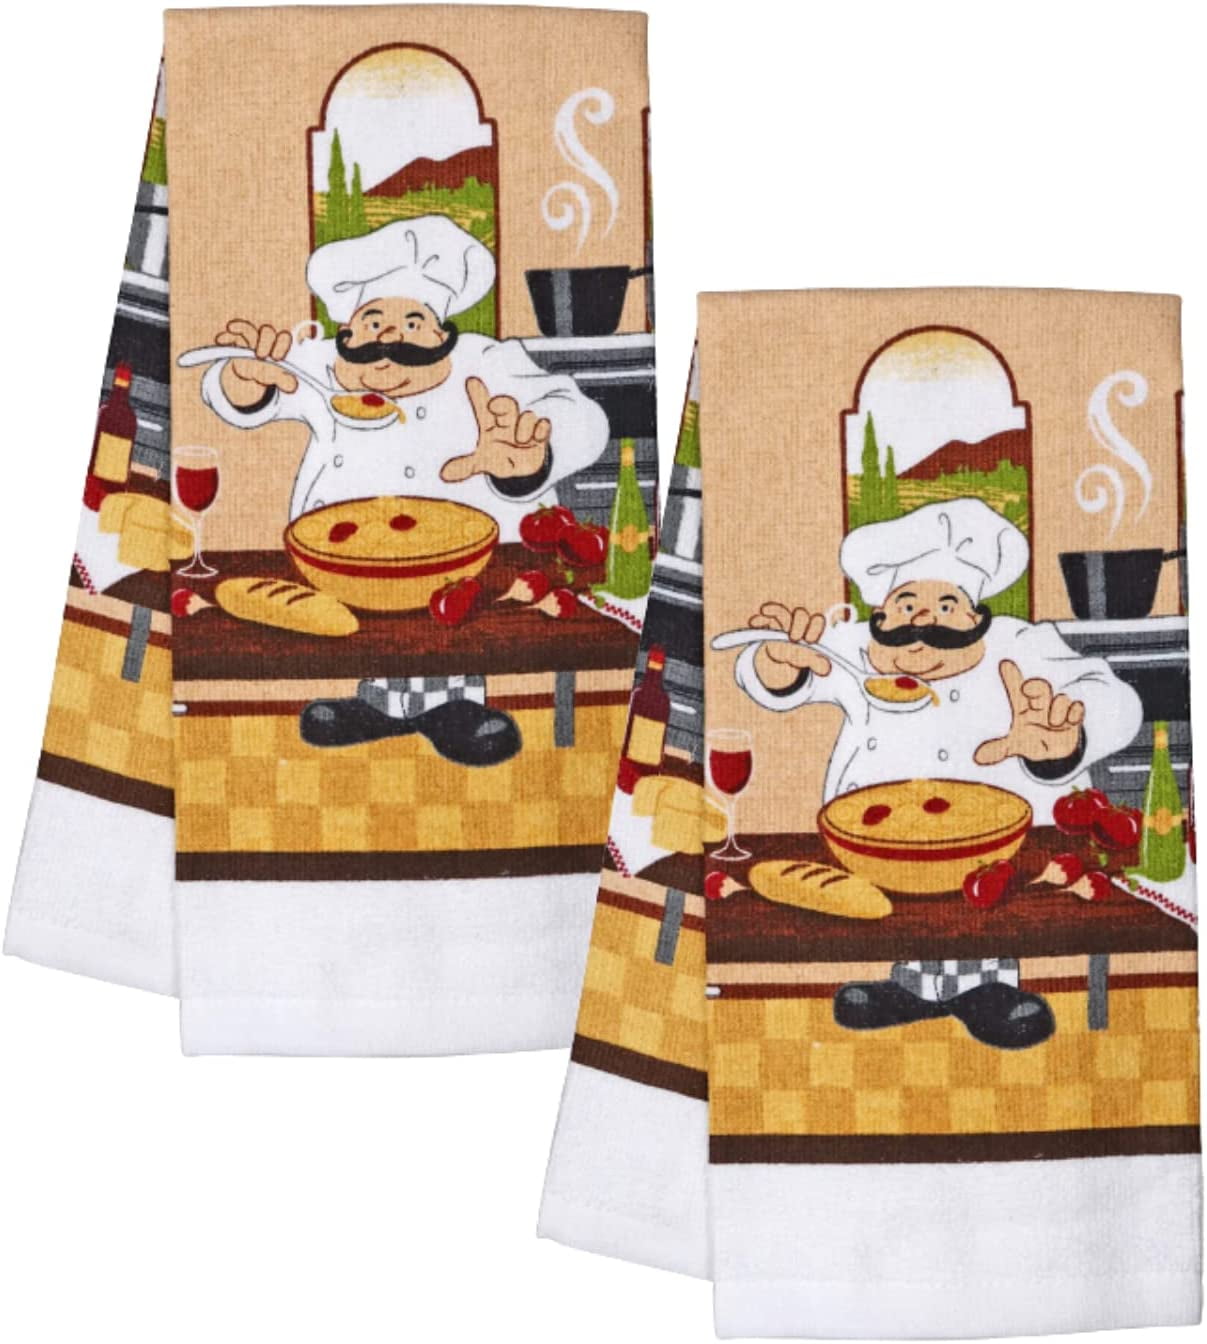 SET of 2 Fabric Printed Kitchen Potholders Italian Bistro Cooking Chef Themed 